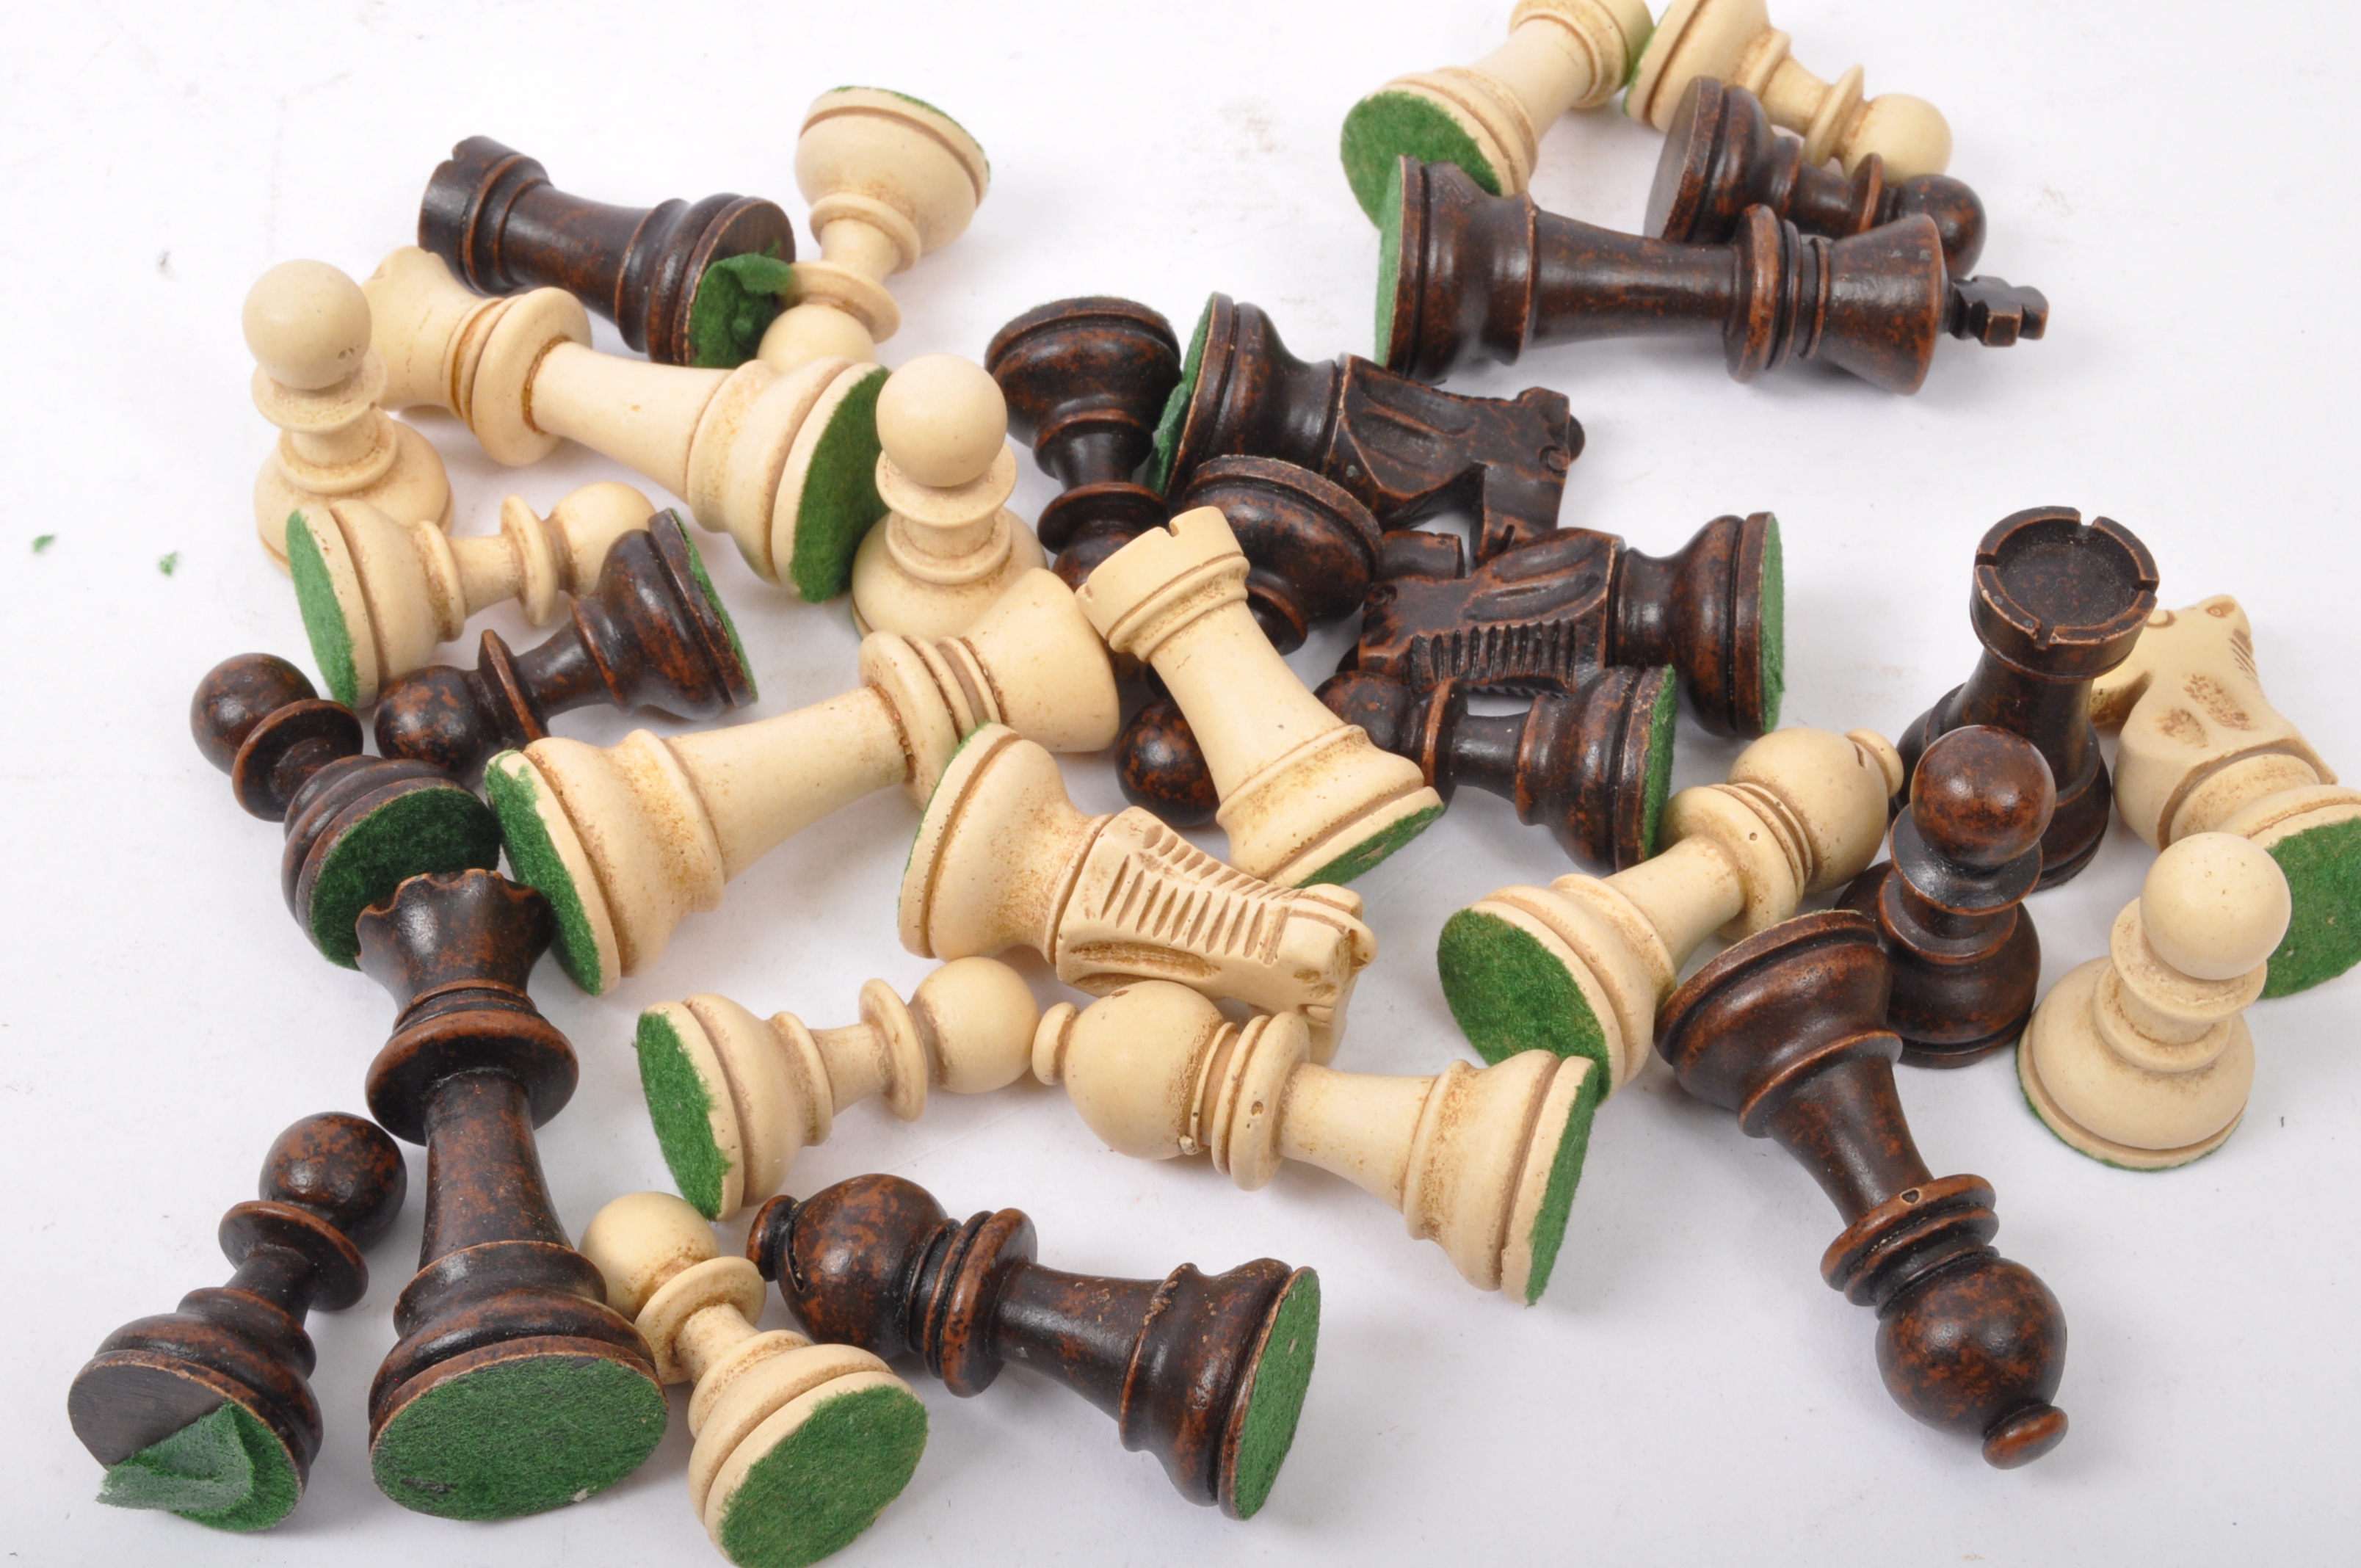 COLLECTION OF VINTAGE TURNED WOOD CHESS PIECES